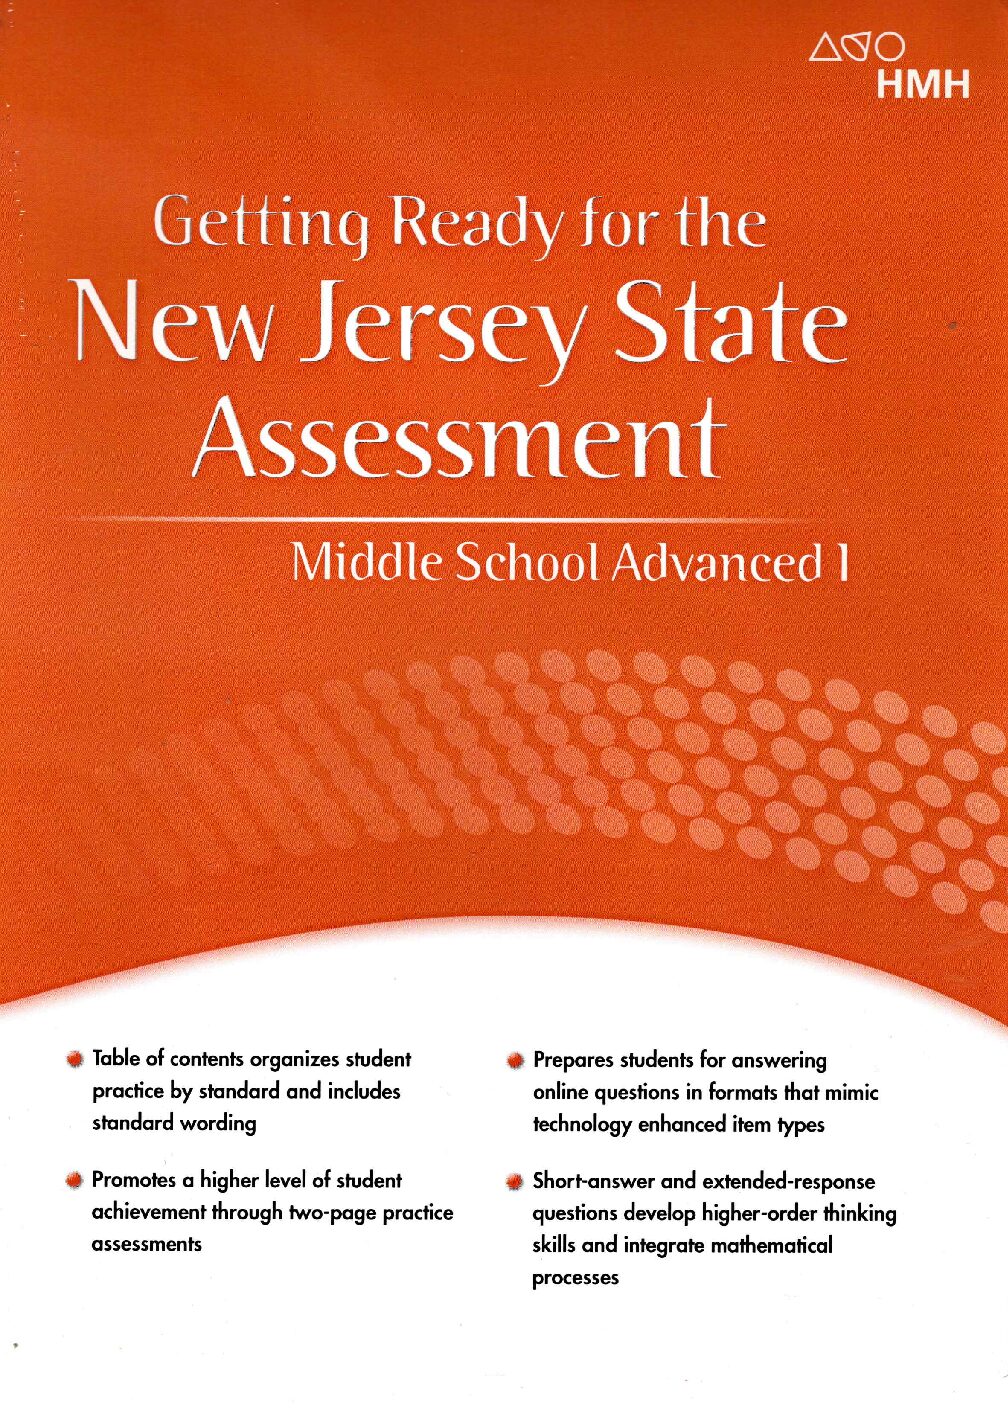 Getting Ready for the New Jersey State Assessment - Middle School Advanced 1